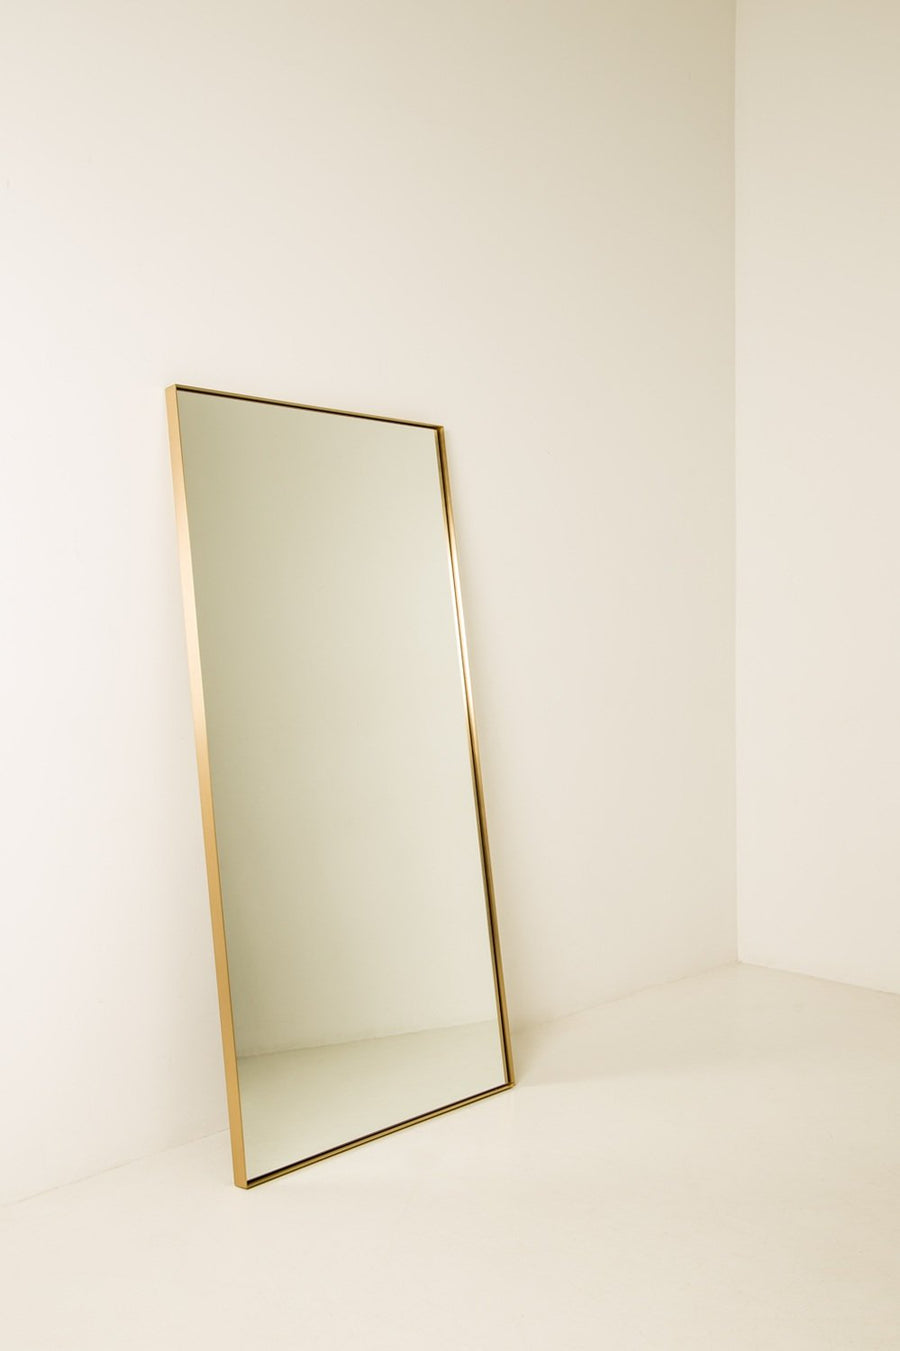 Place Mirror Sample - 700 x 1100mm - Aged Brass